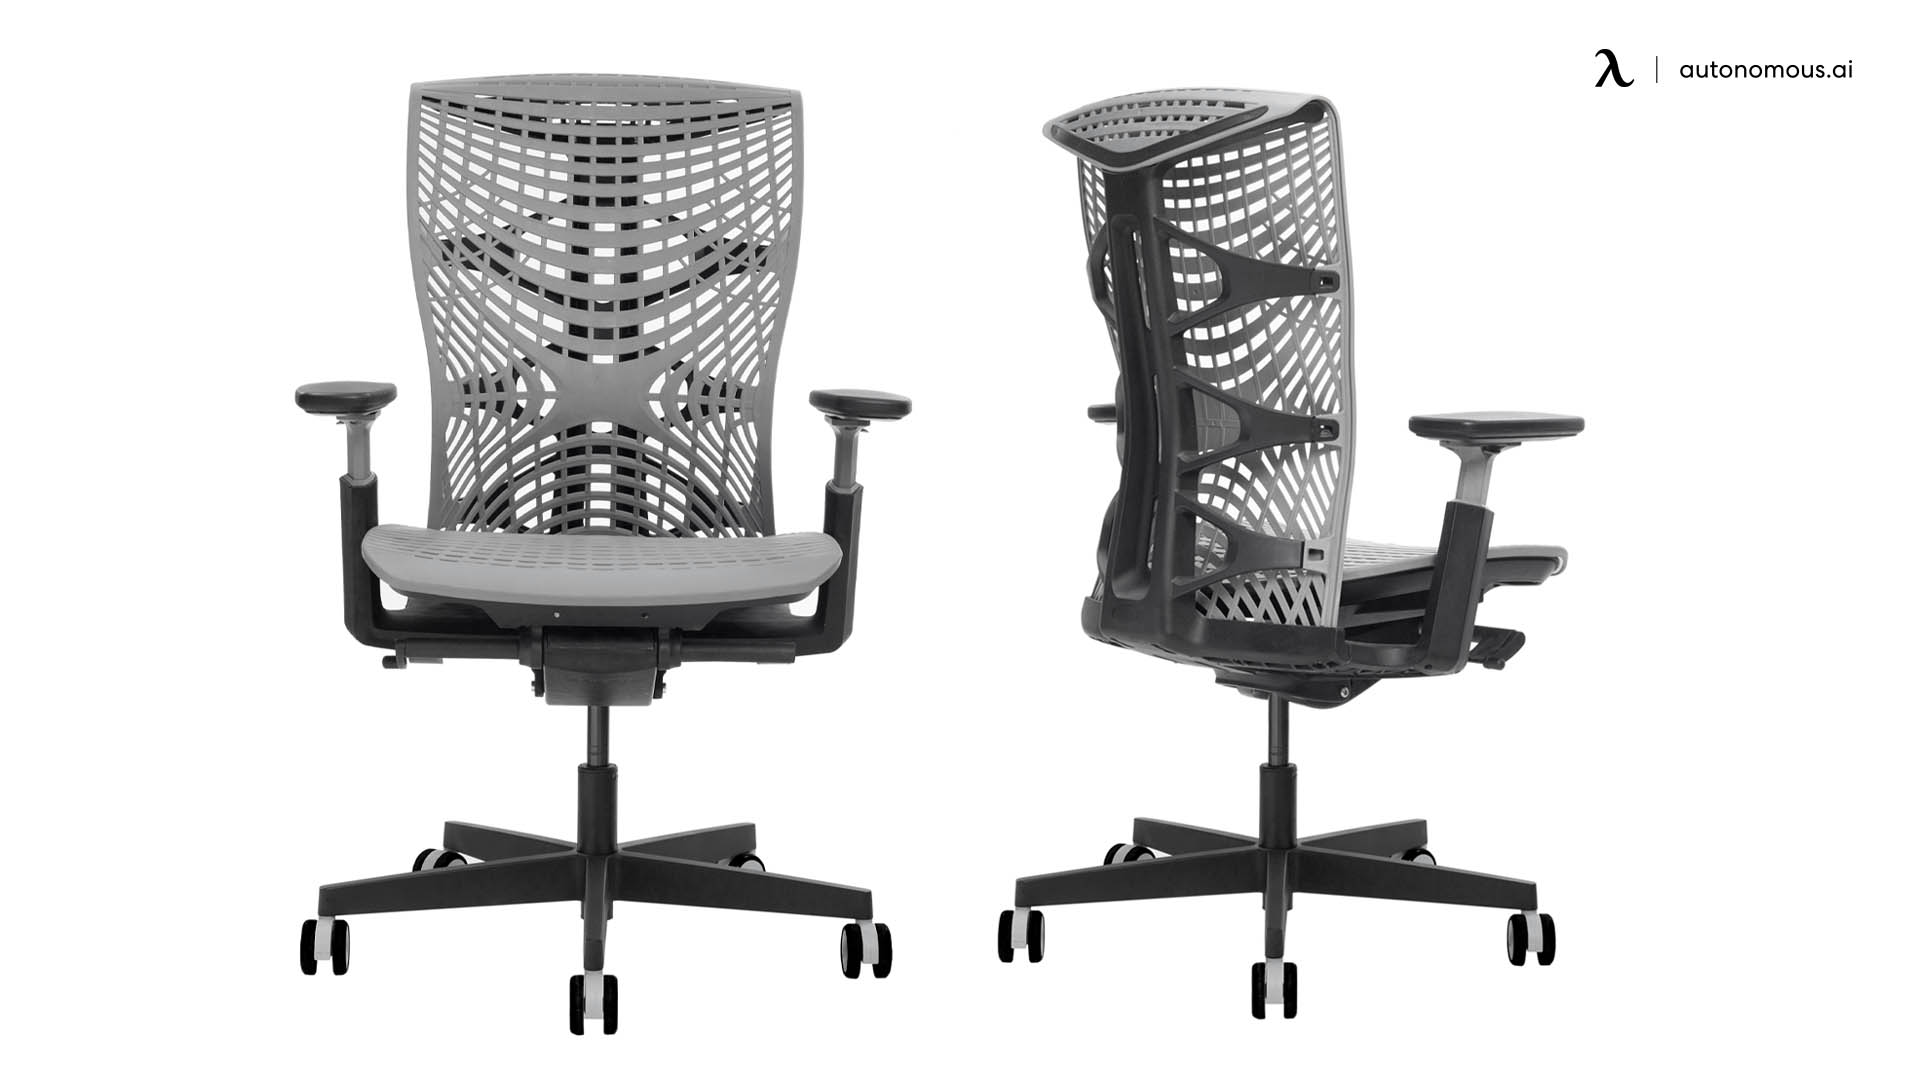 10 Best Ergonomic Chair In Australia Top Seat Choices For 2021